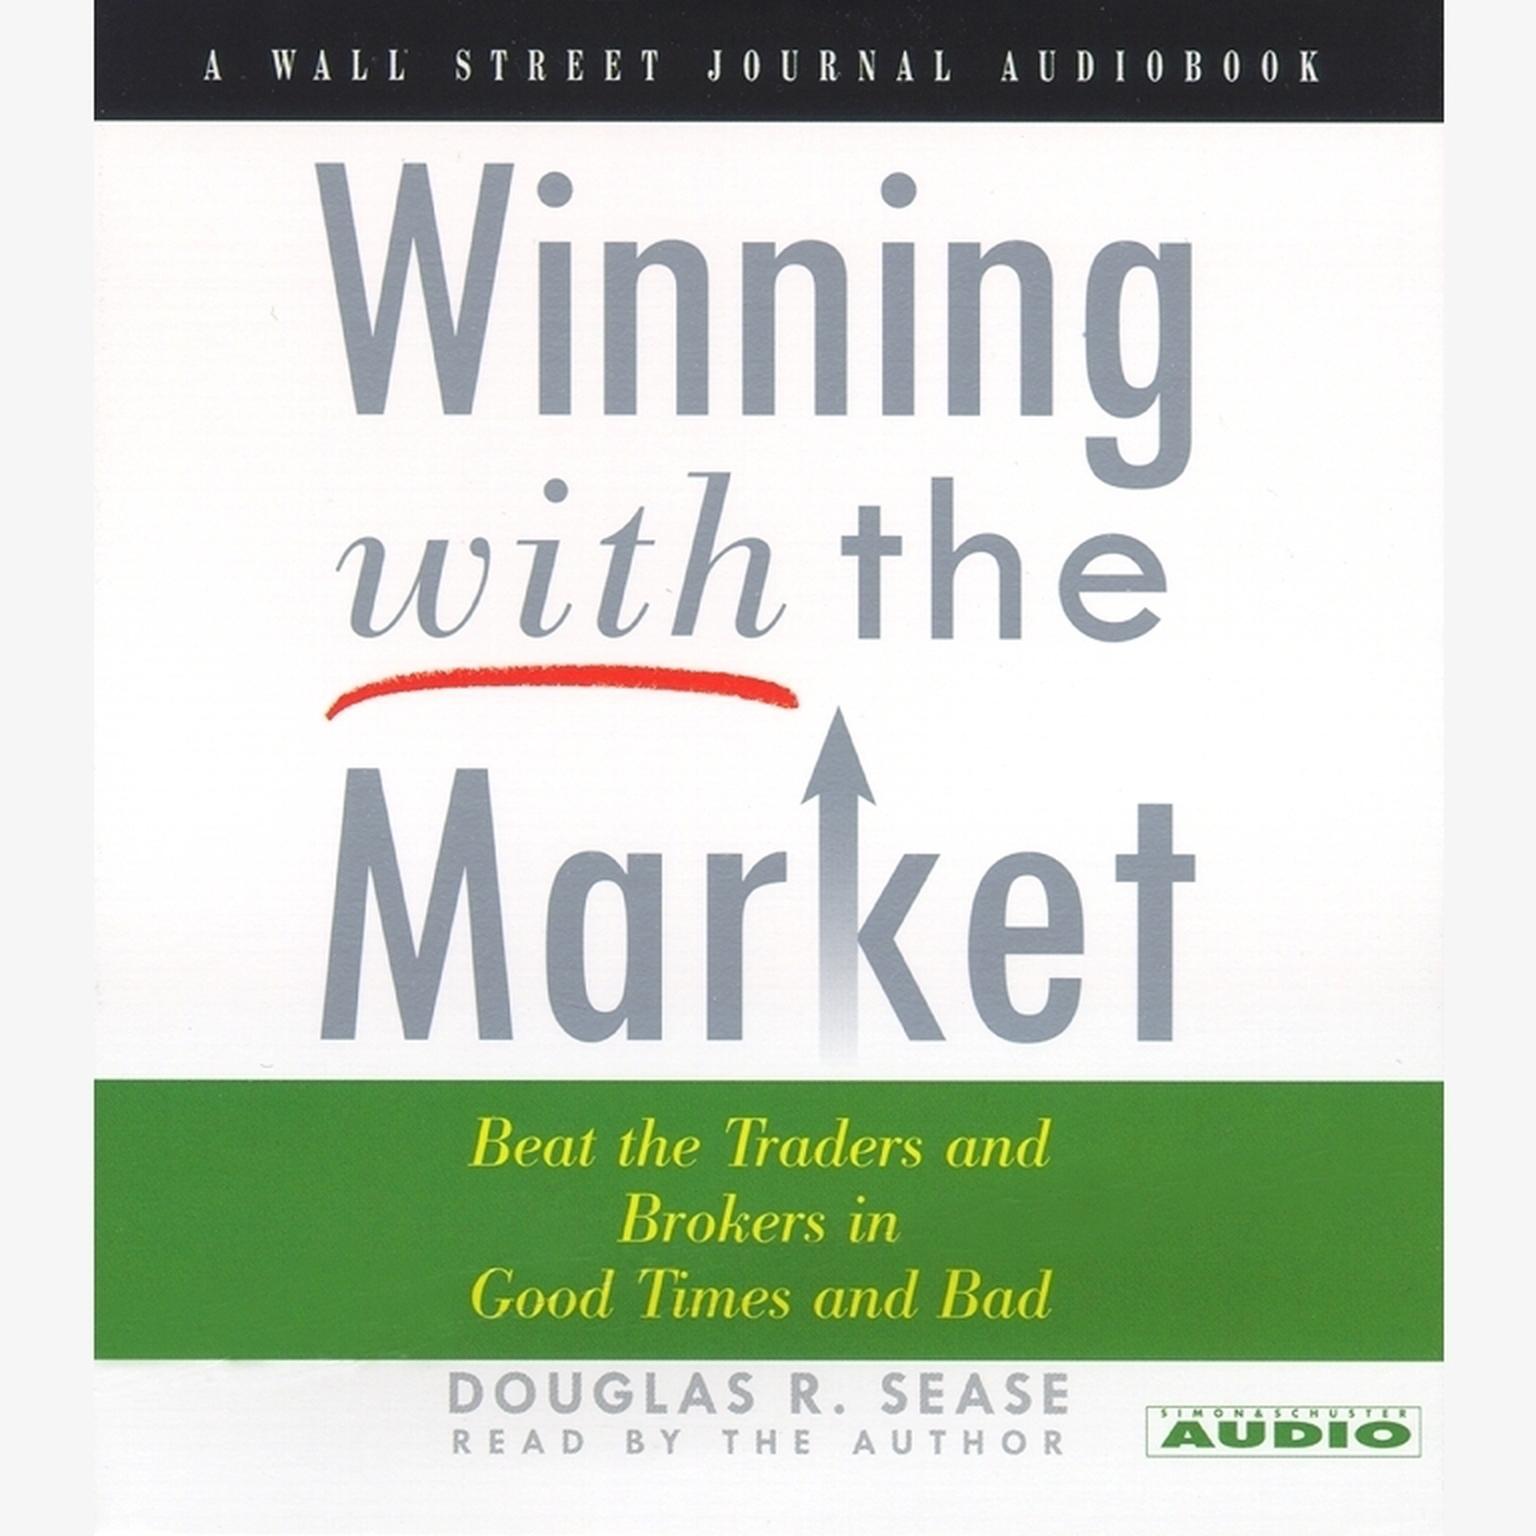 Winning With The Market (Abridged): Beat the Traders and Brokers in Good Times and Bad Audiobook, by Douglas R. Sease